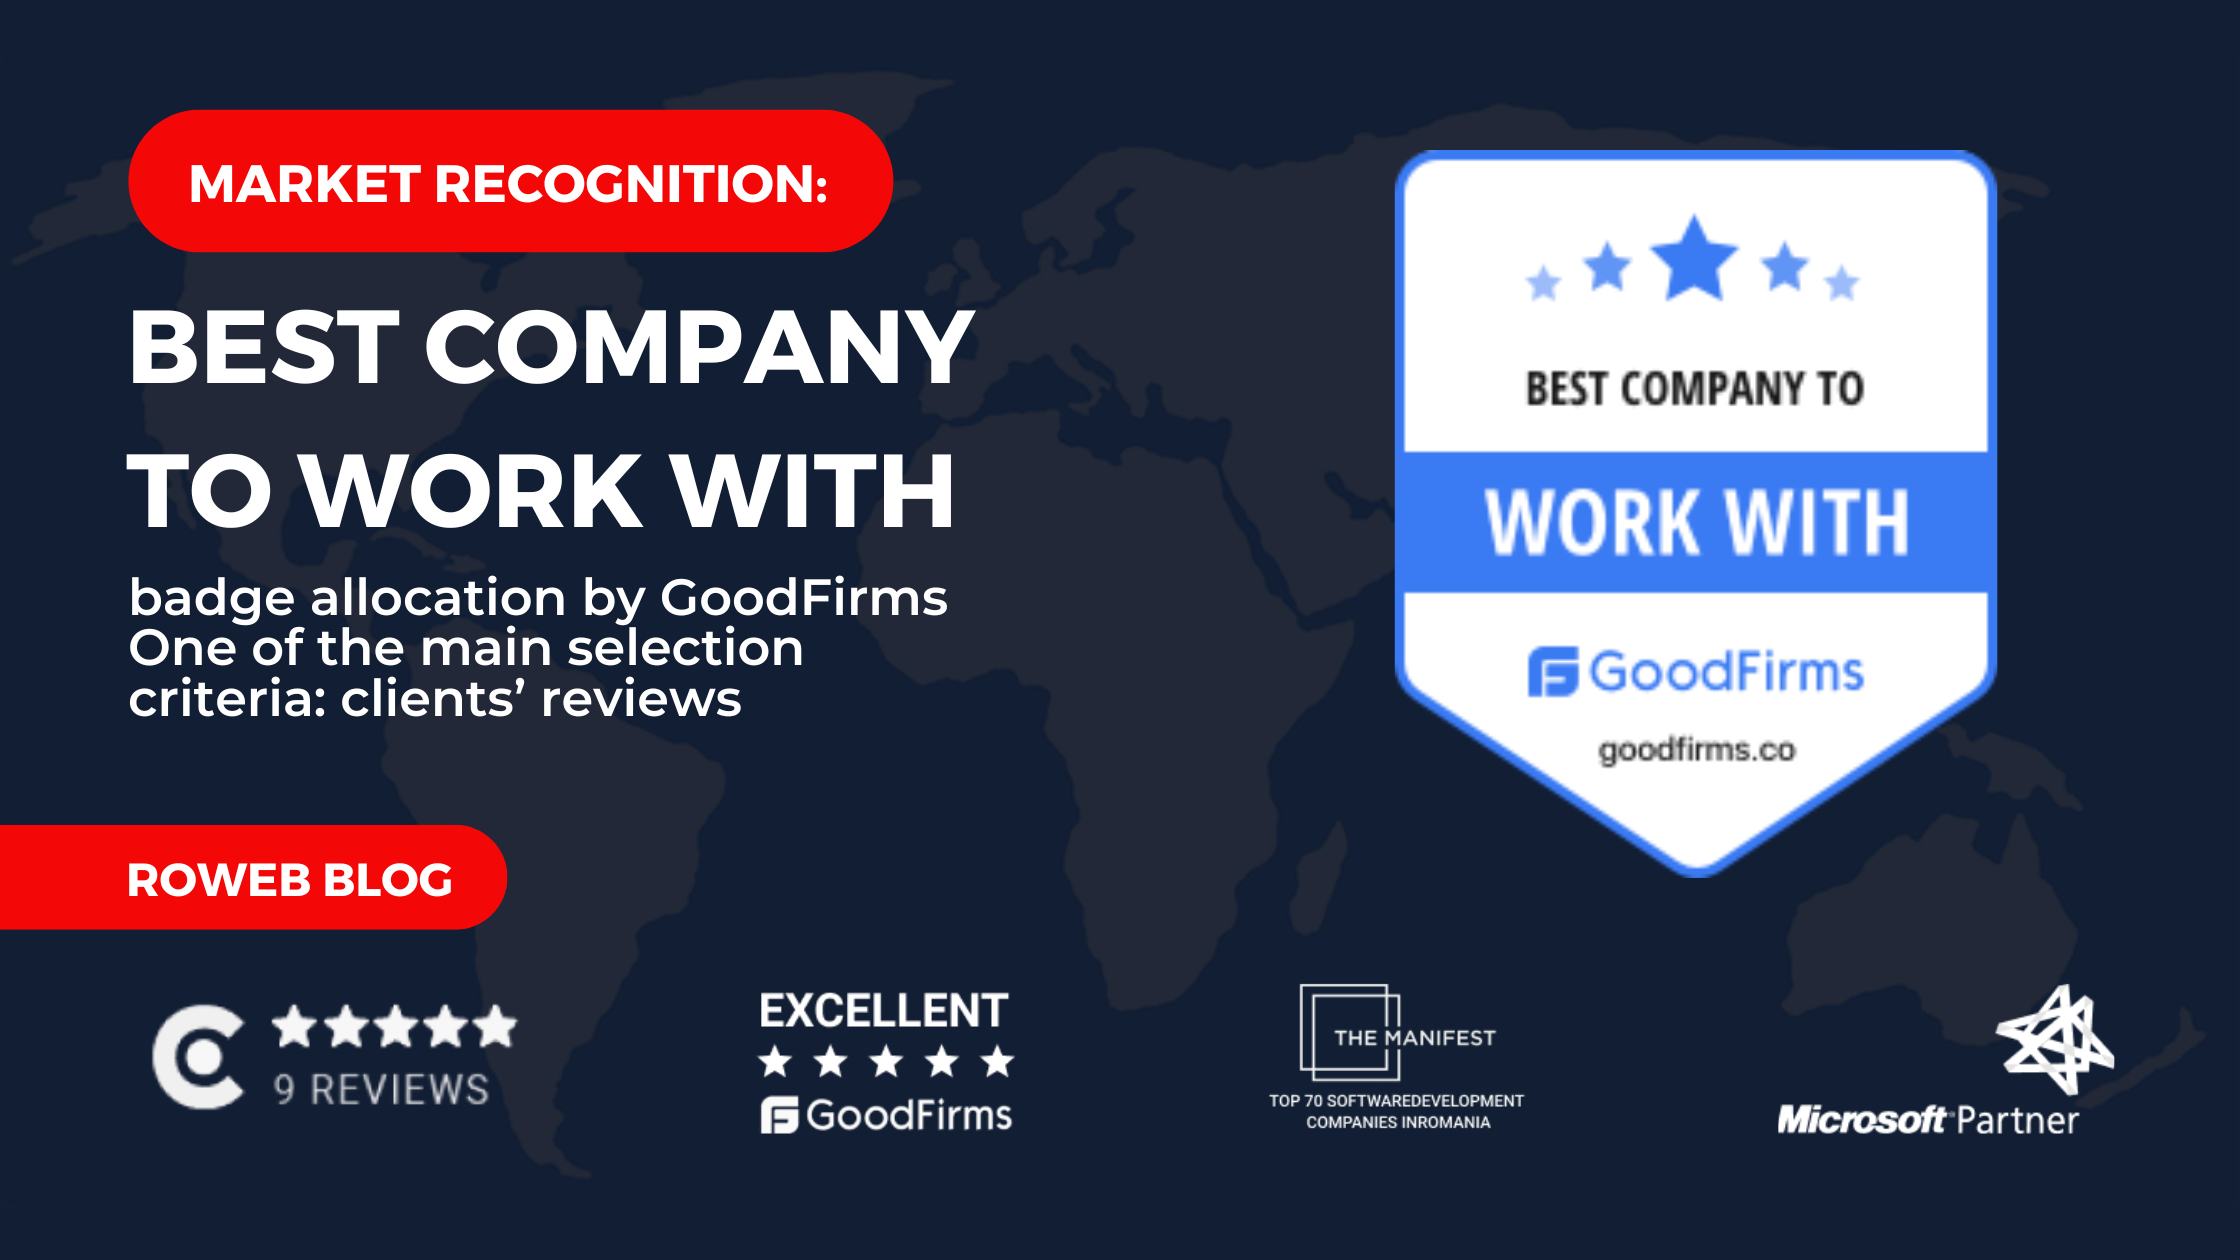 Roweb received from GoodFirms the title: “Best Company to Work